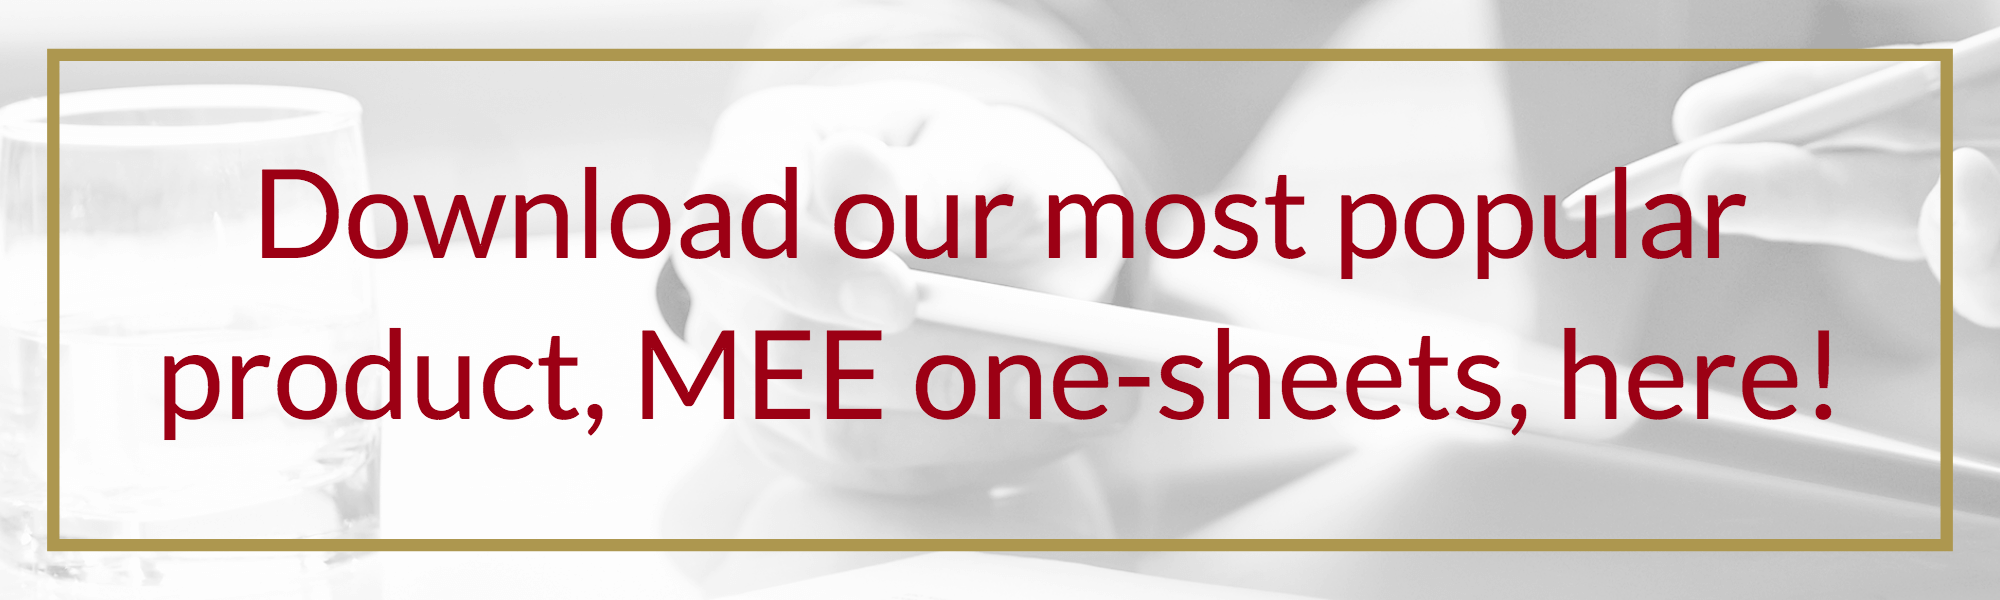 mee one-sheets, jd advising one sheets, multistate essay exam one sheets